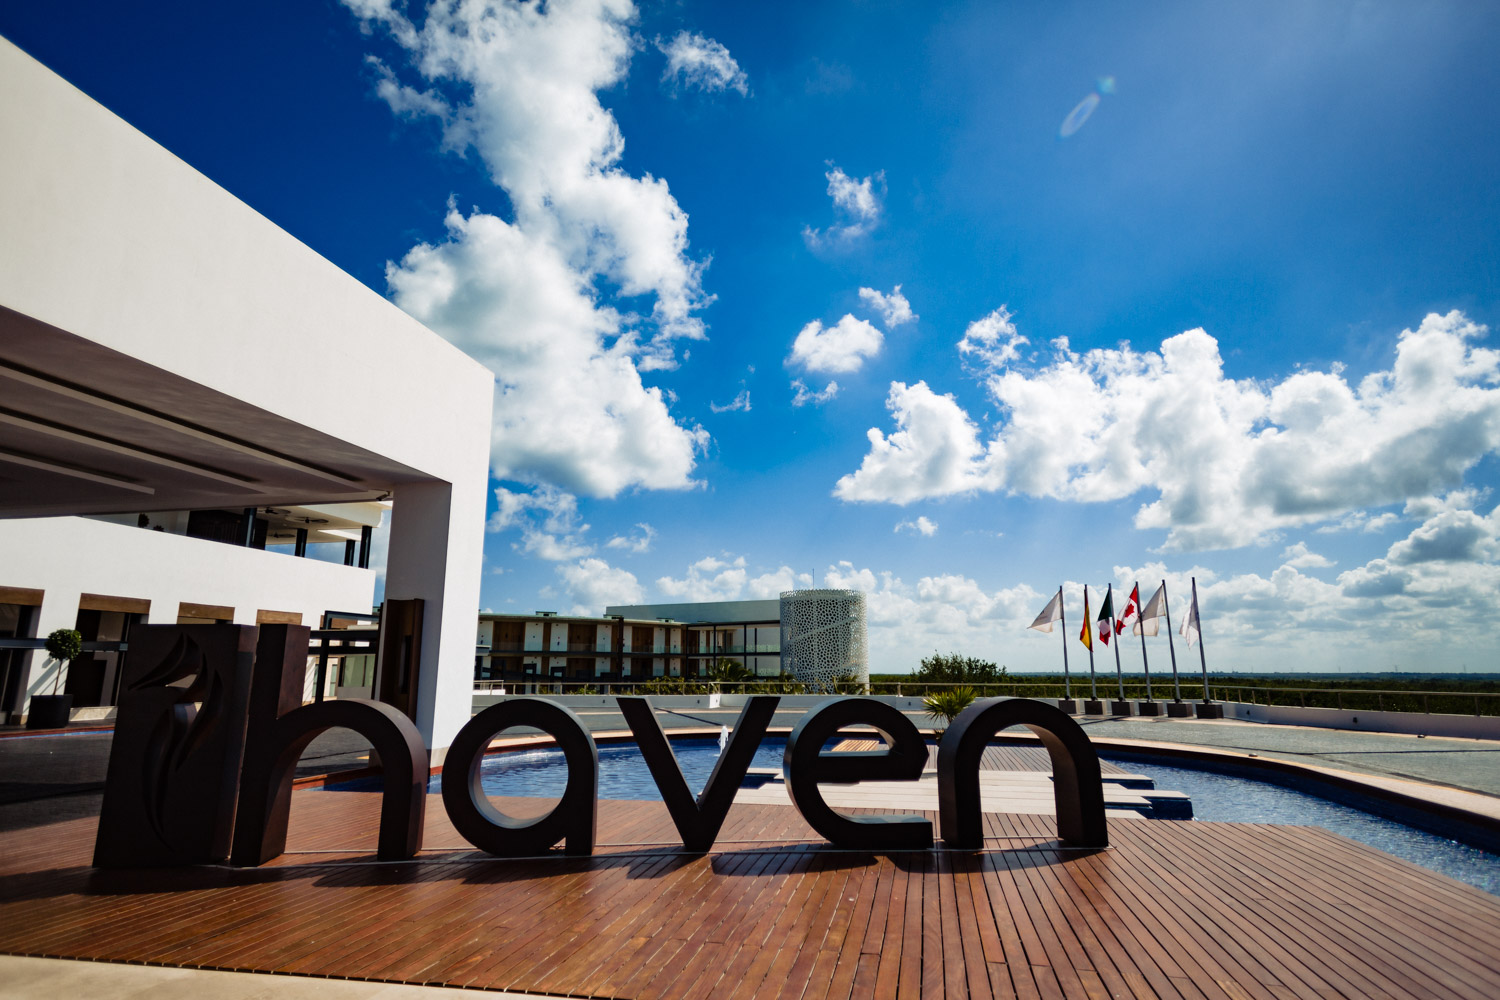 Main Entrance of Haven Riviera Cancun